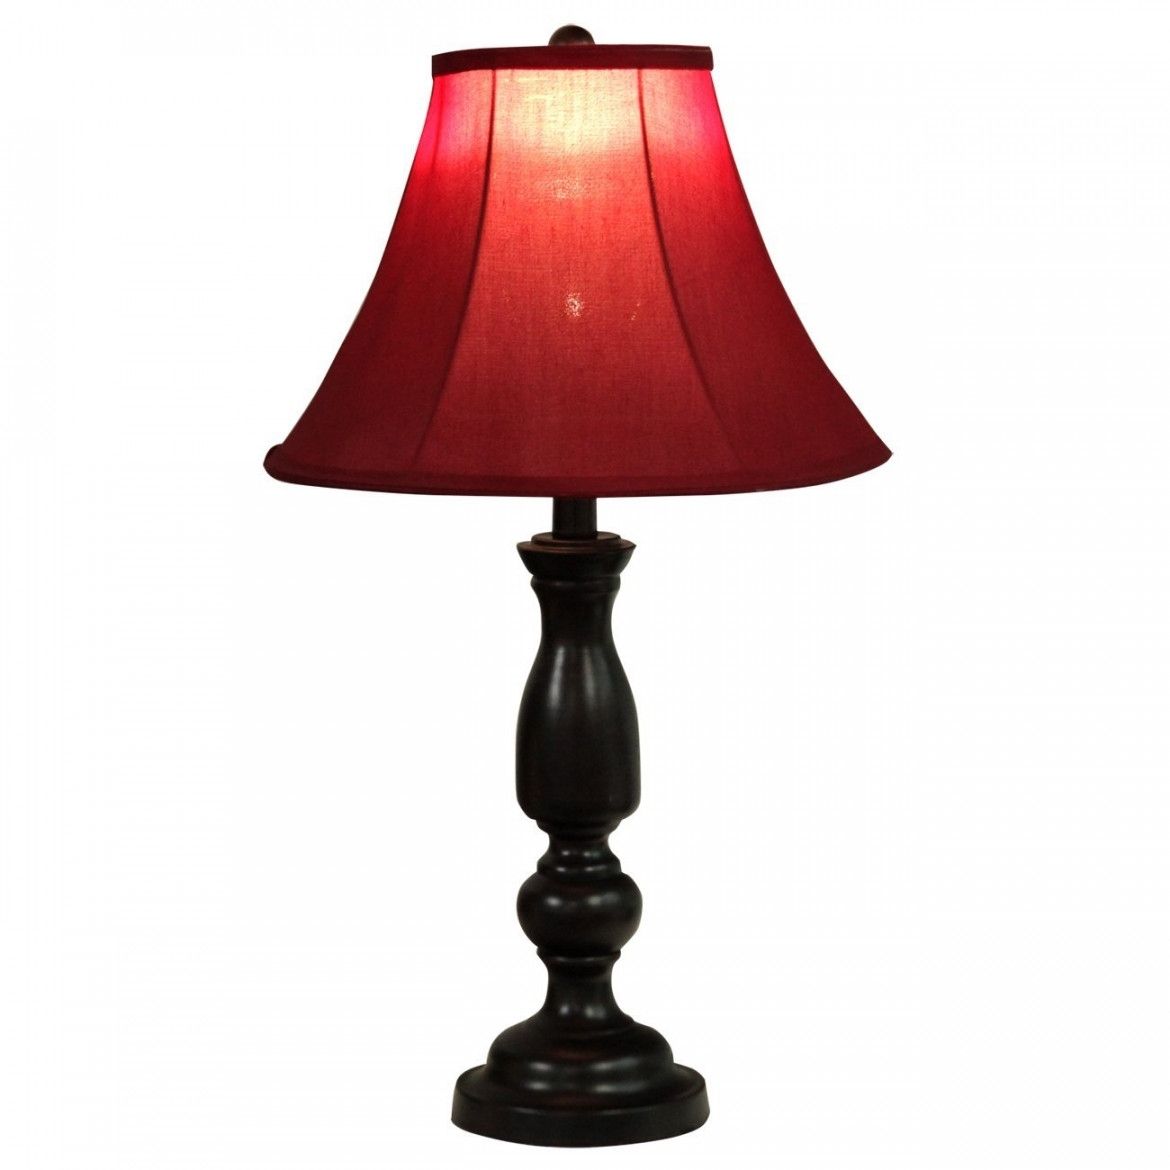 Vintage Red Table Lamp For Living Room Traditional Table Lamp With Pertaining To Traditional Table Lamps For Living Room (View 2 of 15)